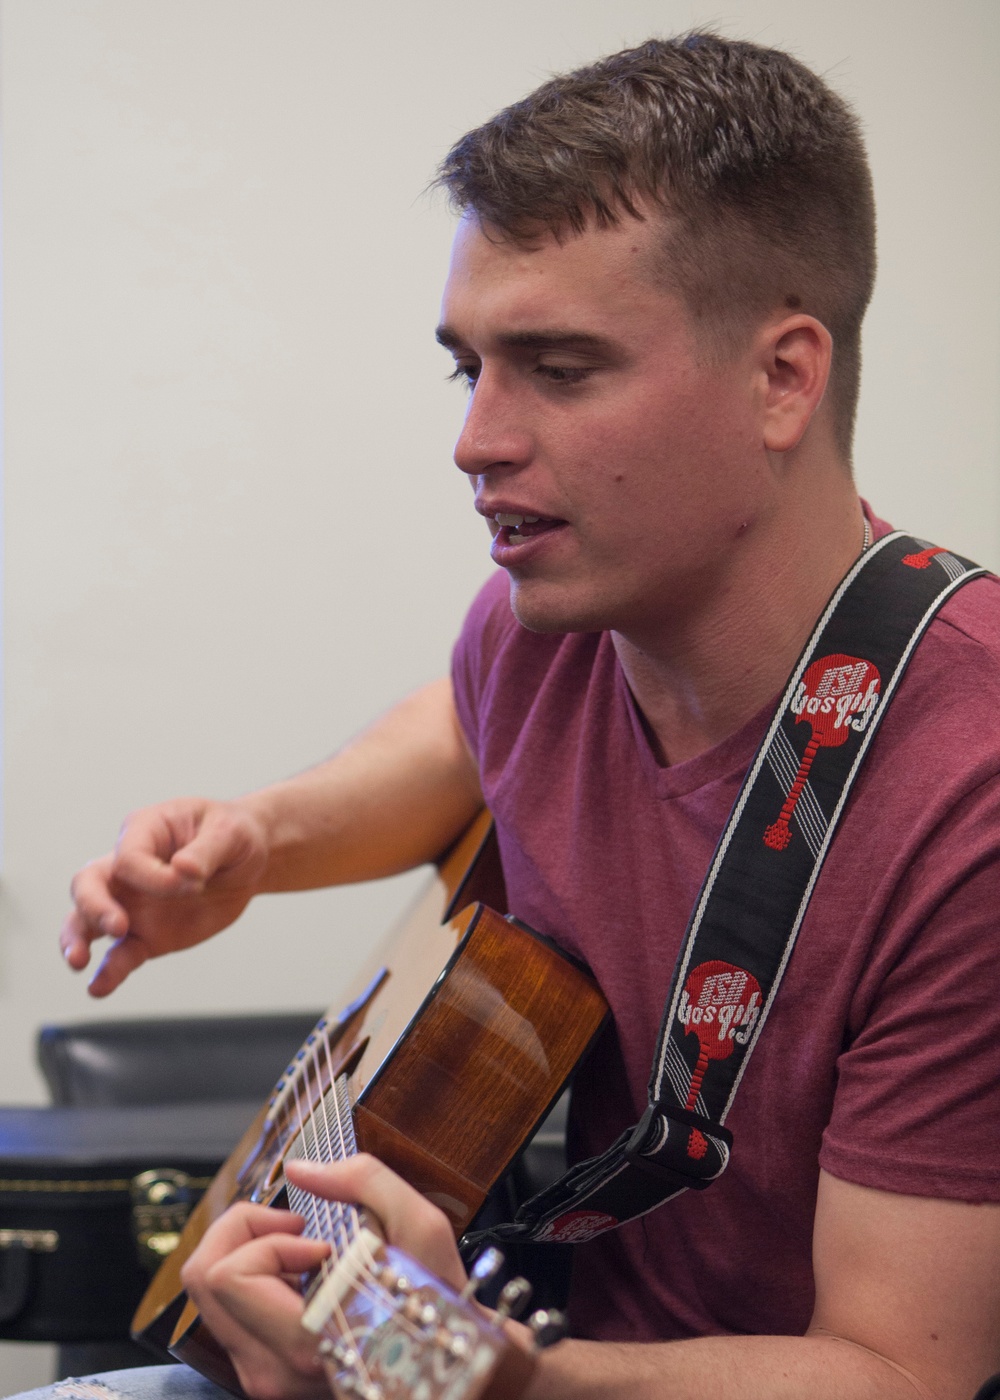 Airman aspires to country music stardom